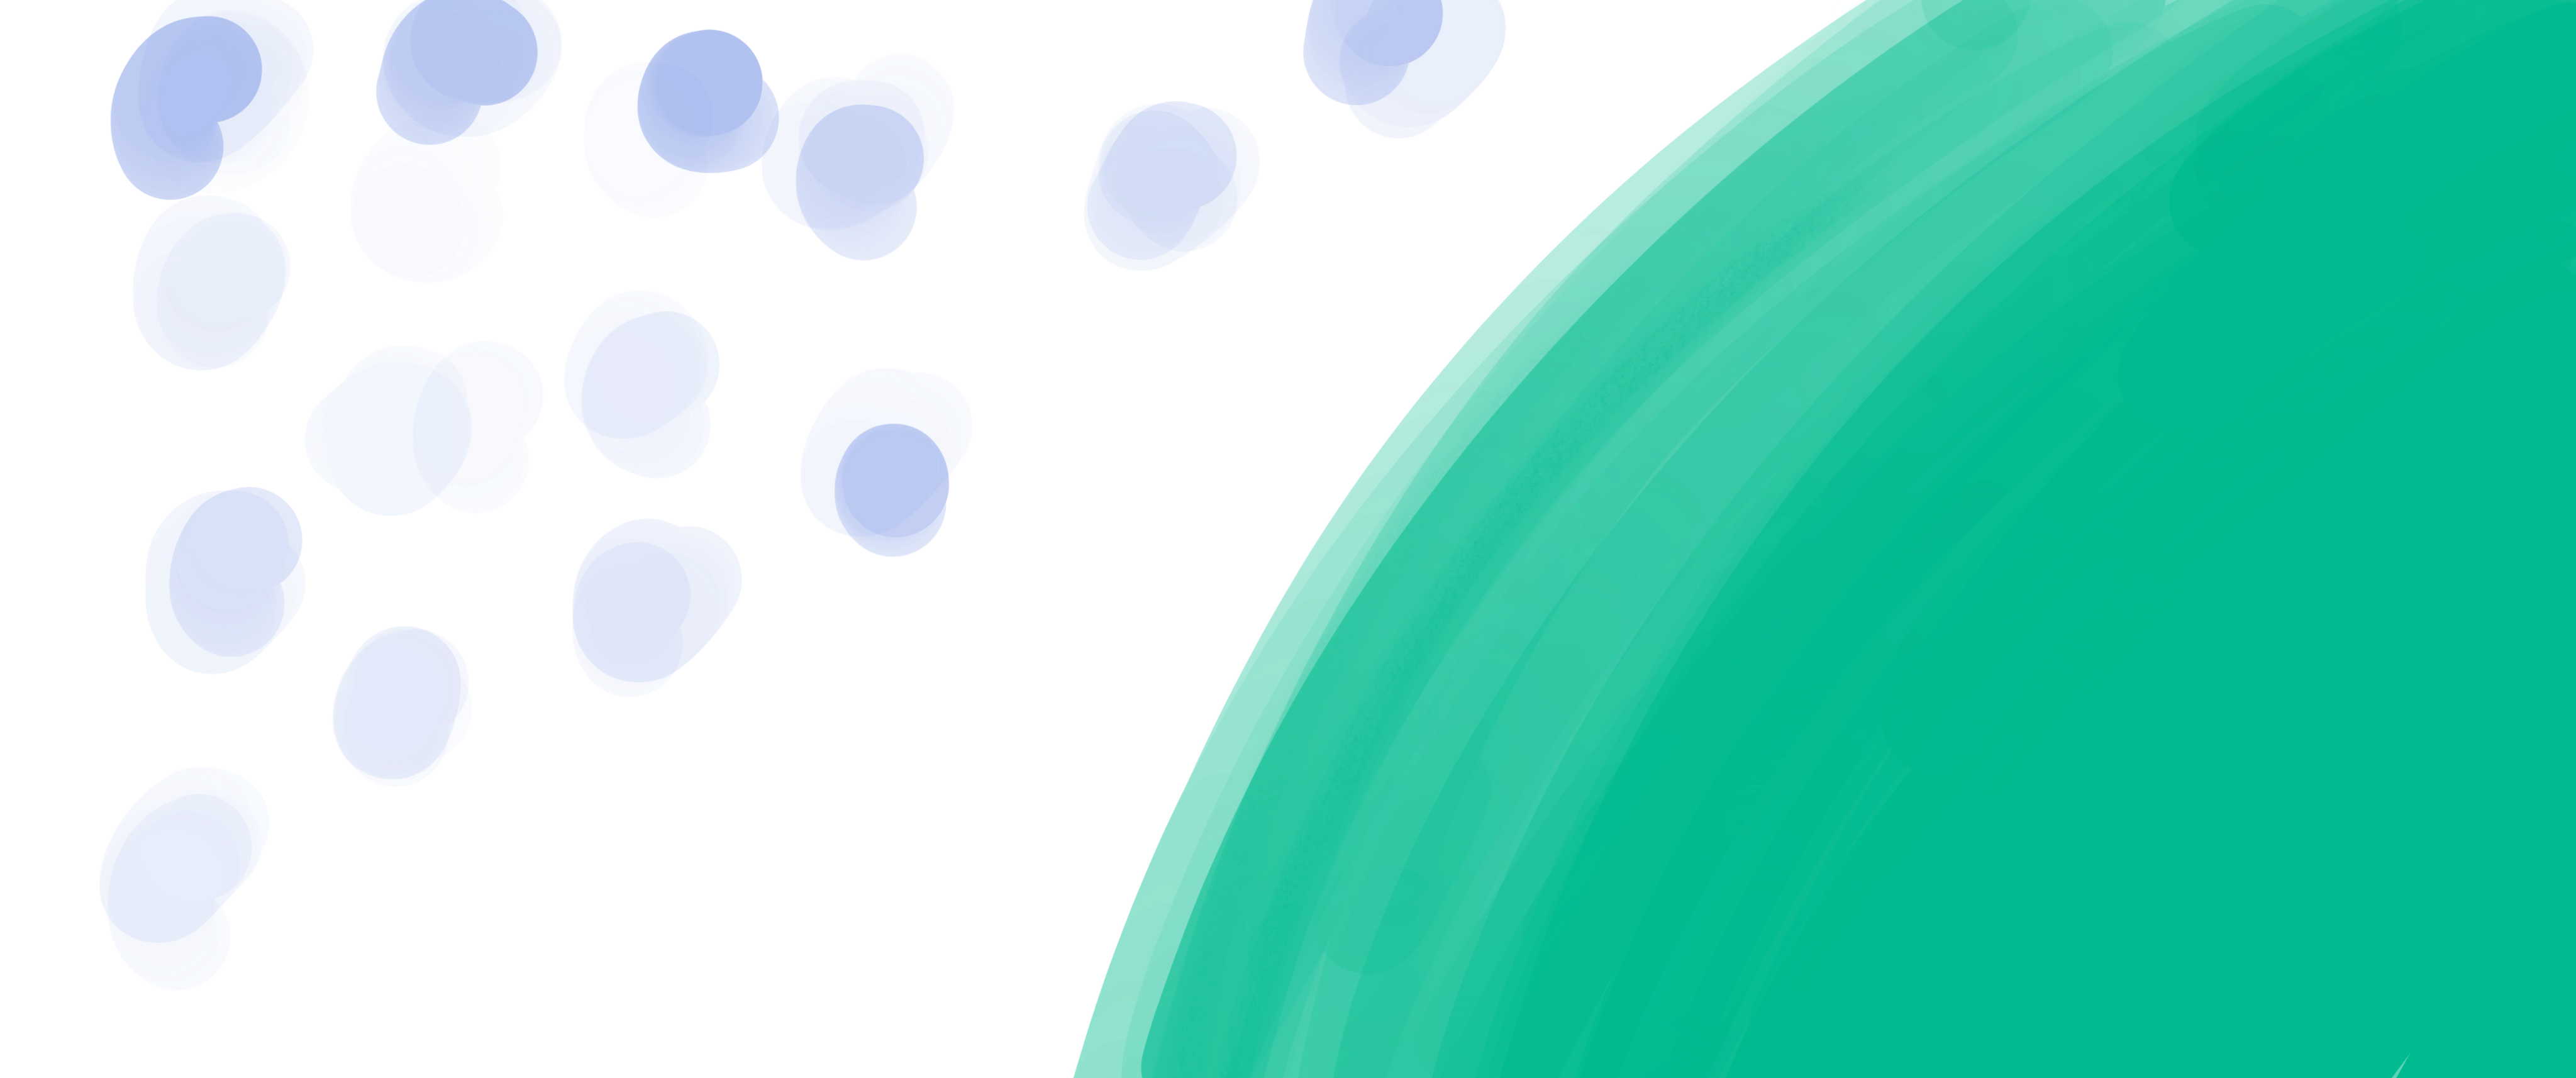 Illustration of a big green circle with smaller blue dots.